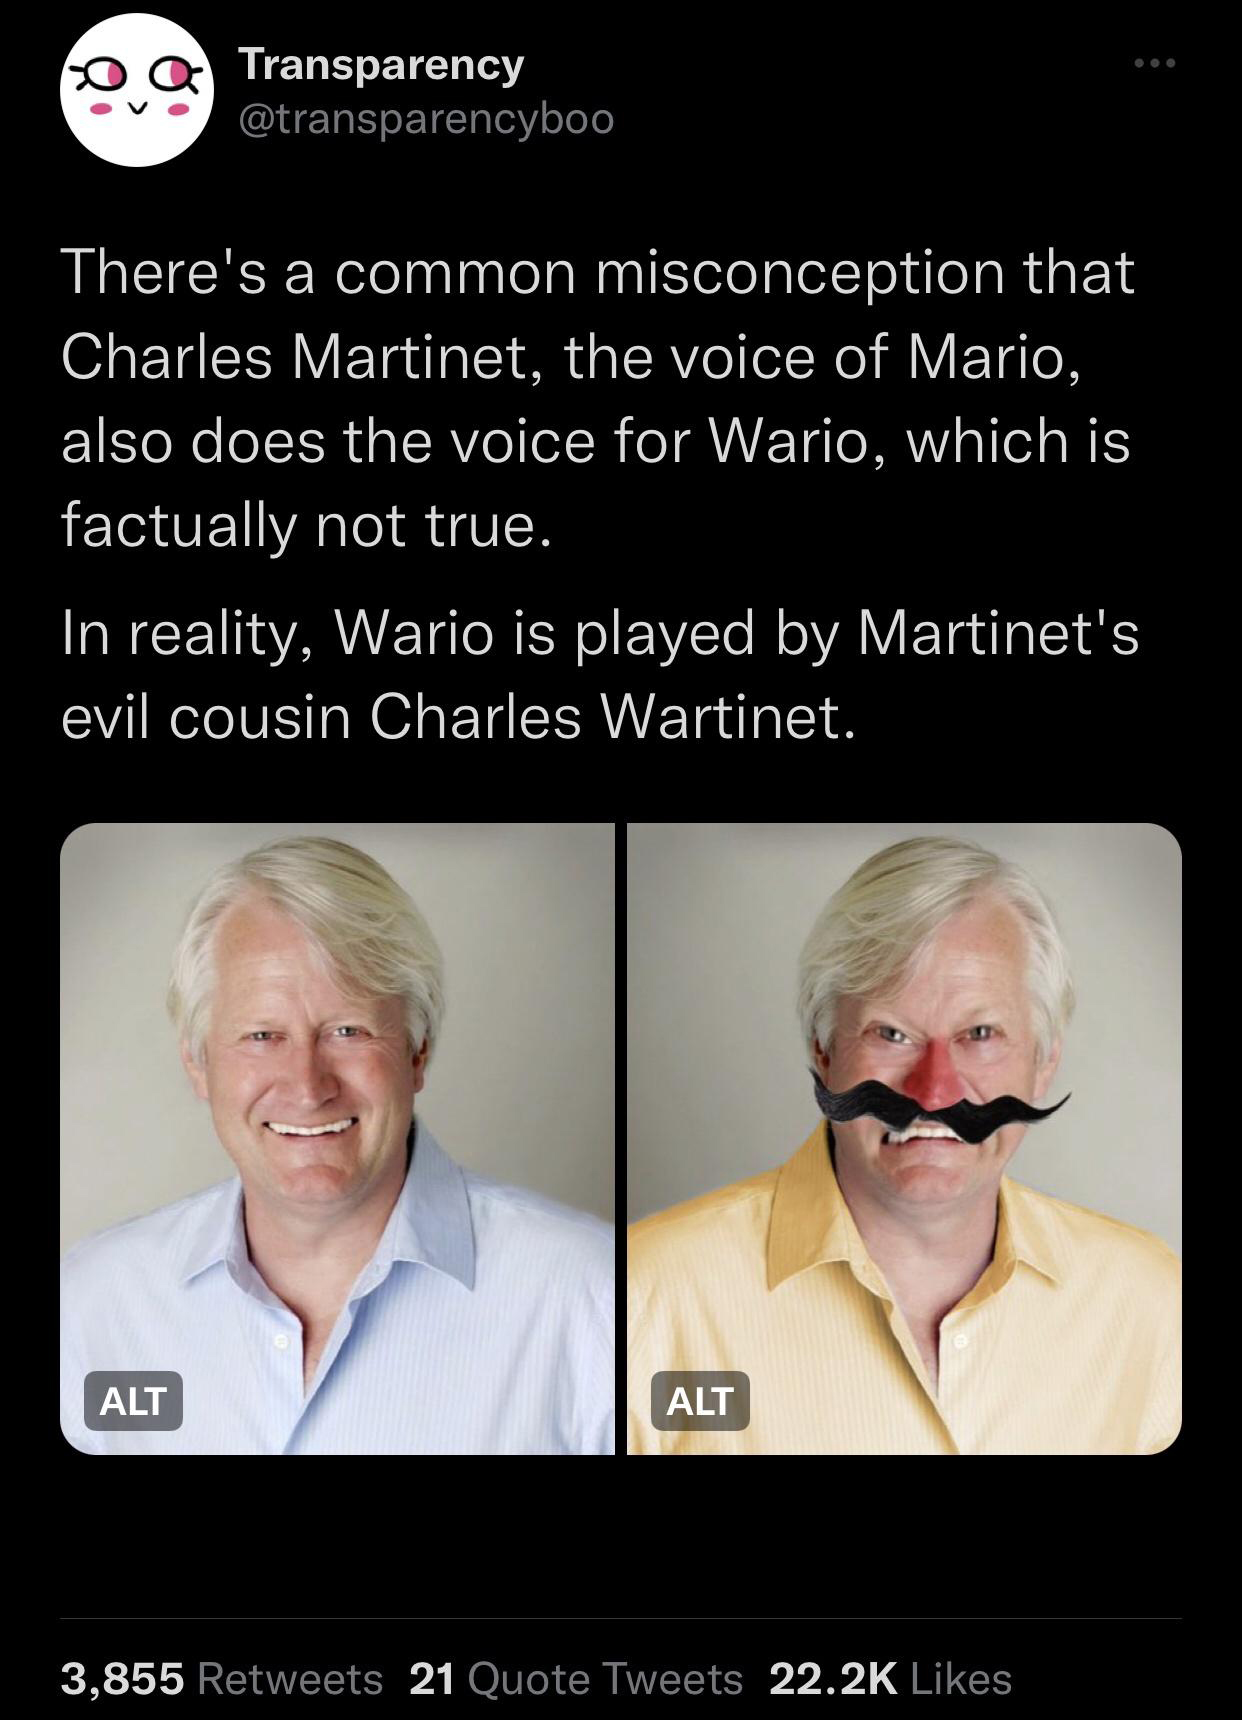 dank memes - charles martinet - Transparency There's a common misconception that Charles Martinet, the voice of Mario, also does the voice for Wario, which is factually not true. In reality, Wario is played by Martinet's evil cousin Charles Wartinet. Alt 